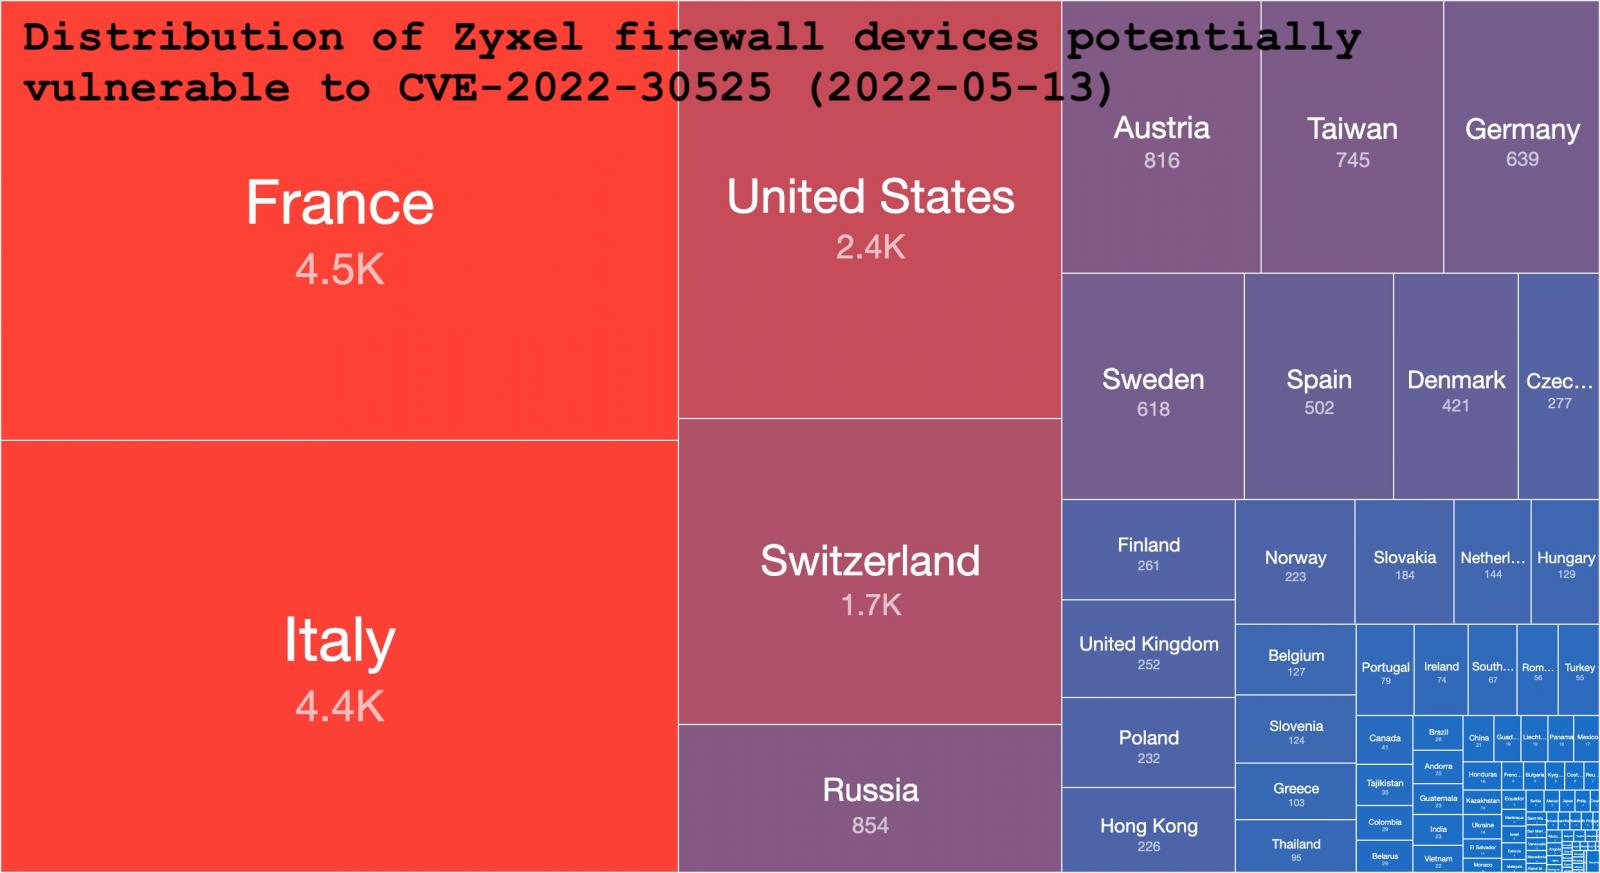 Geographic spread of Zyxel devices potentially vulnerable to CVE-2022-30525